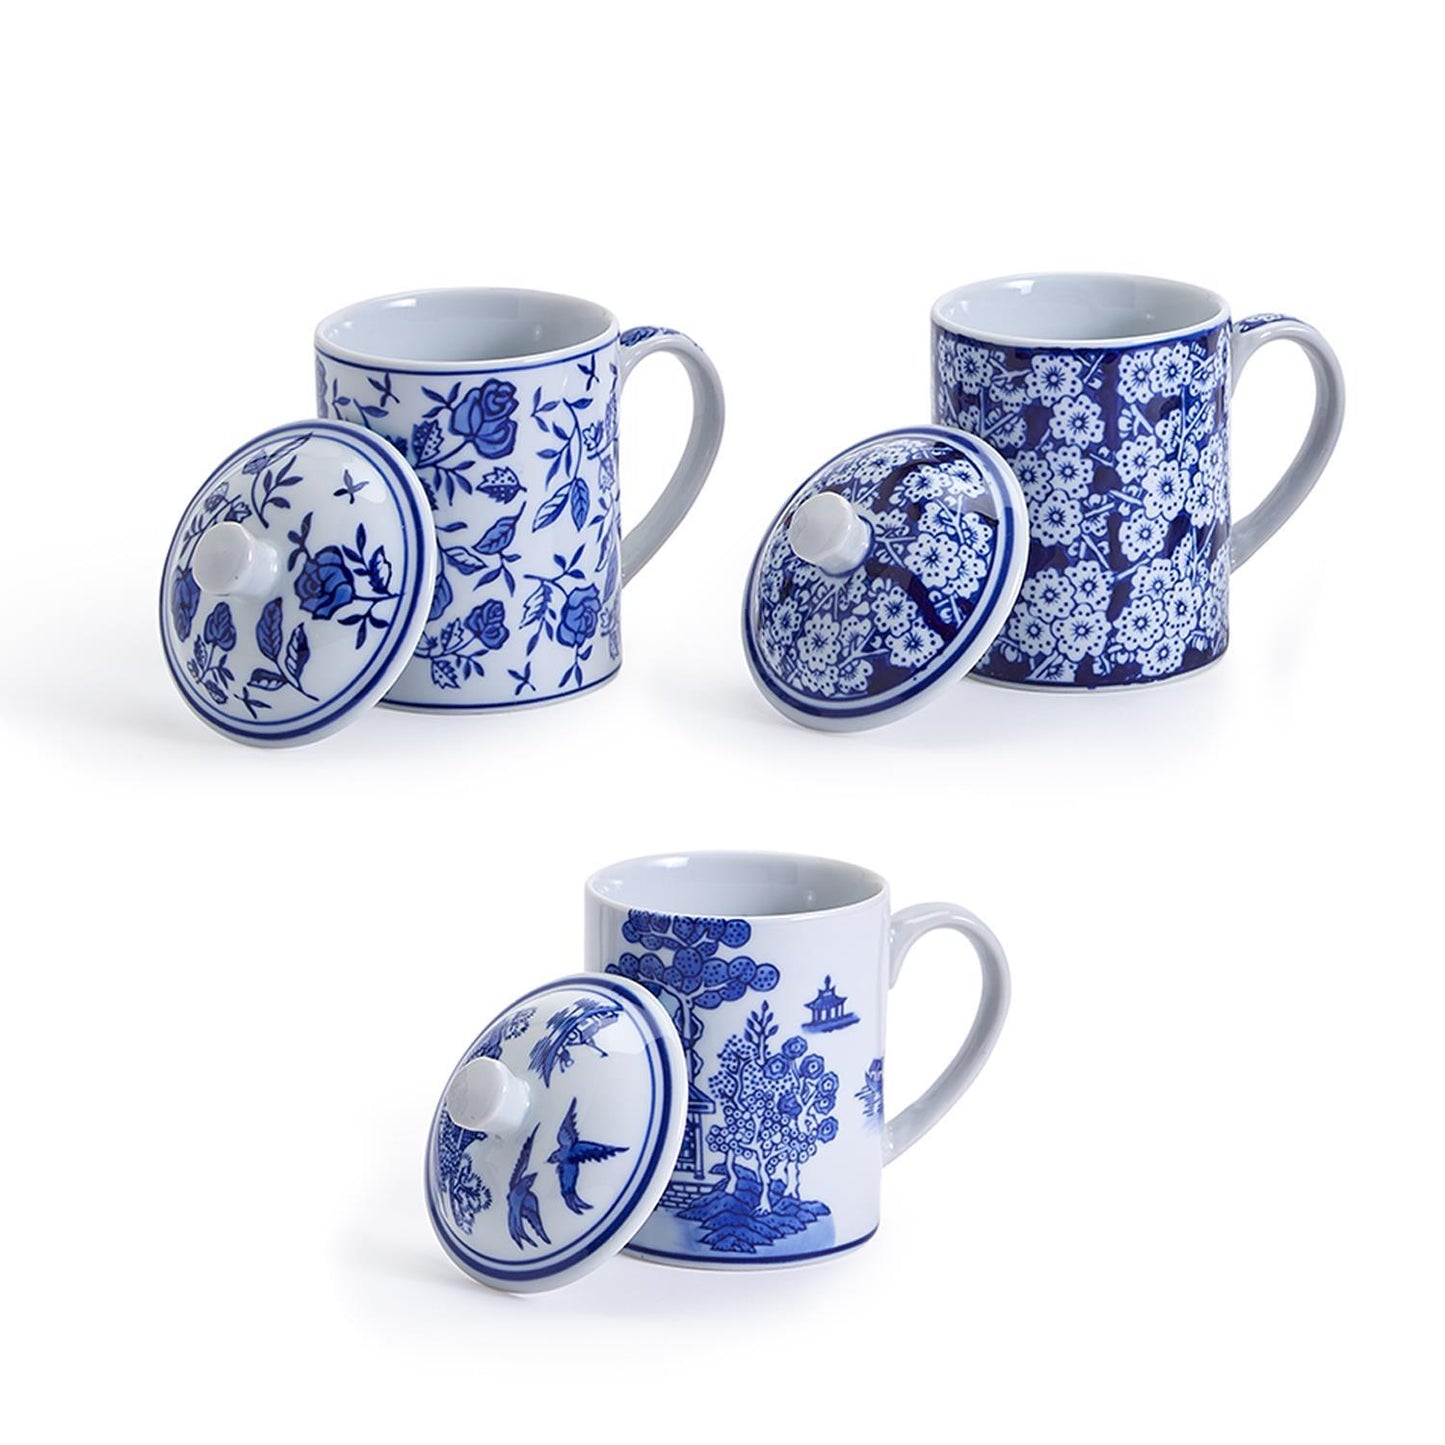 Chinoiserie Mug with Lid (14 oz., microwave and dishwasher safe) - Hand-Painted Porcelain